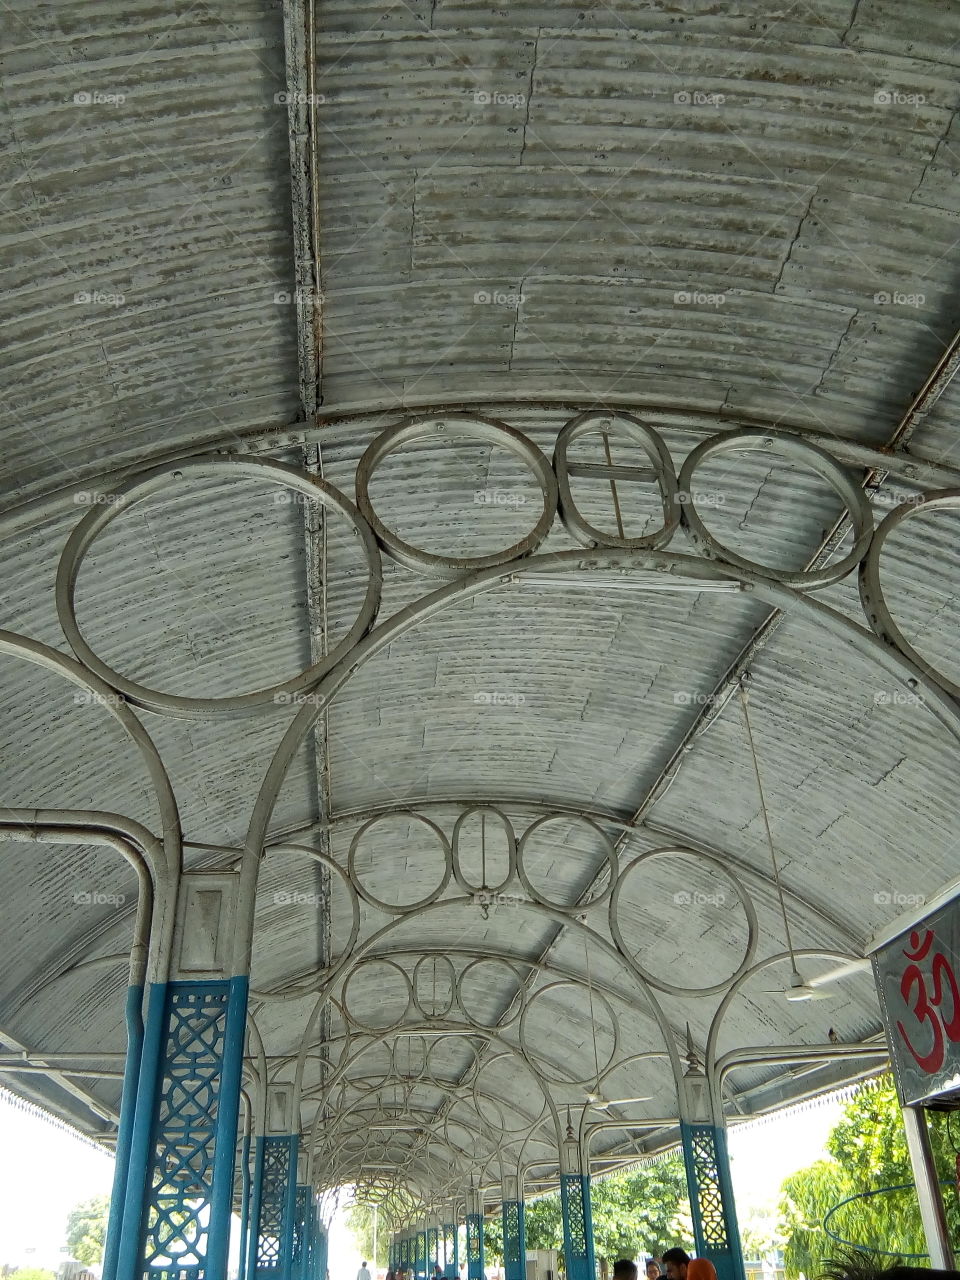 A beautiful design of ceiling of railway station Patiala. A beautiful Historical city in India.